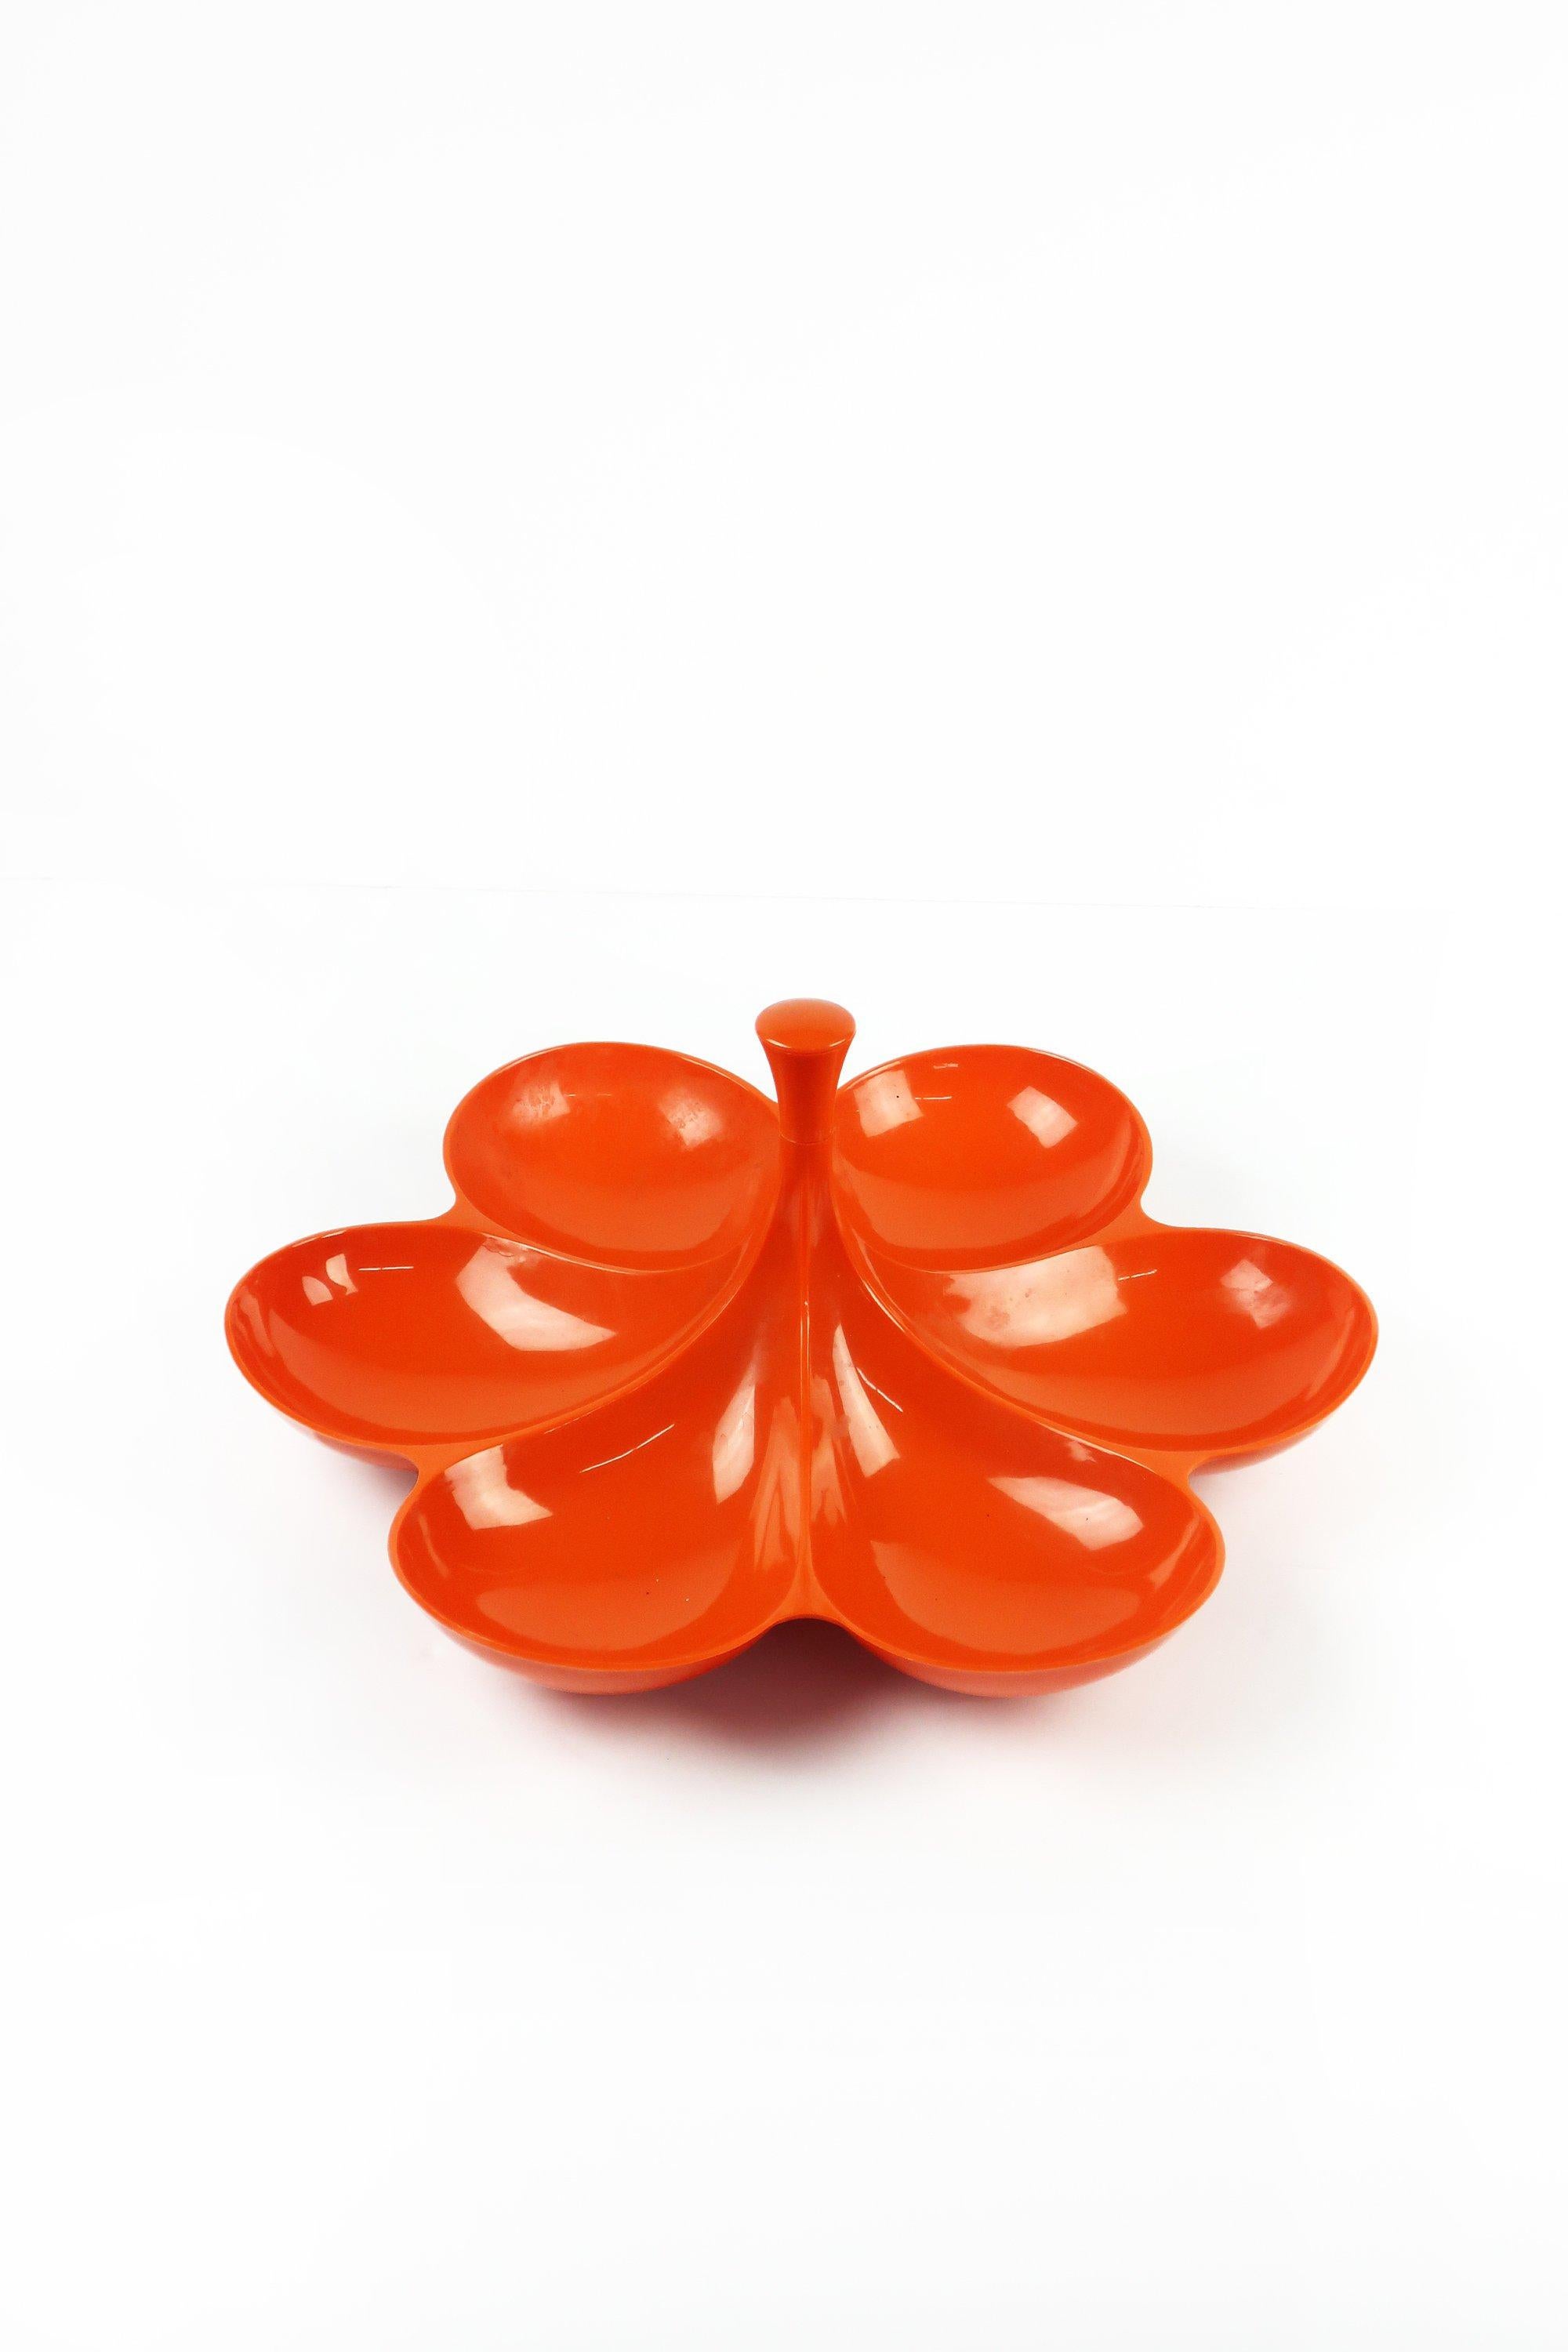 A beautiful Mid-Century Modern orange flower-shaped snack server with bullt-in Lazy Susan built in the base. The perfect addition to any MCM, Mod, or Contemporary home, and it is fun to spin!
 
 Measures: 14” x 14” x 7”.